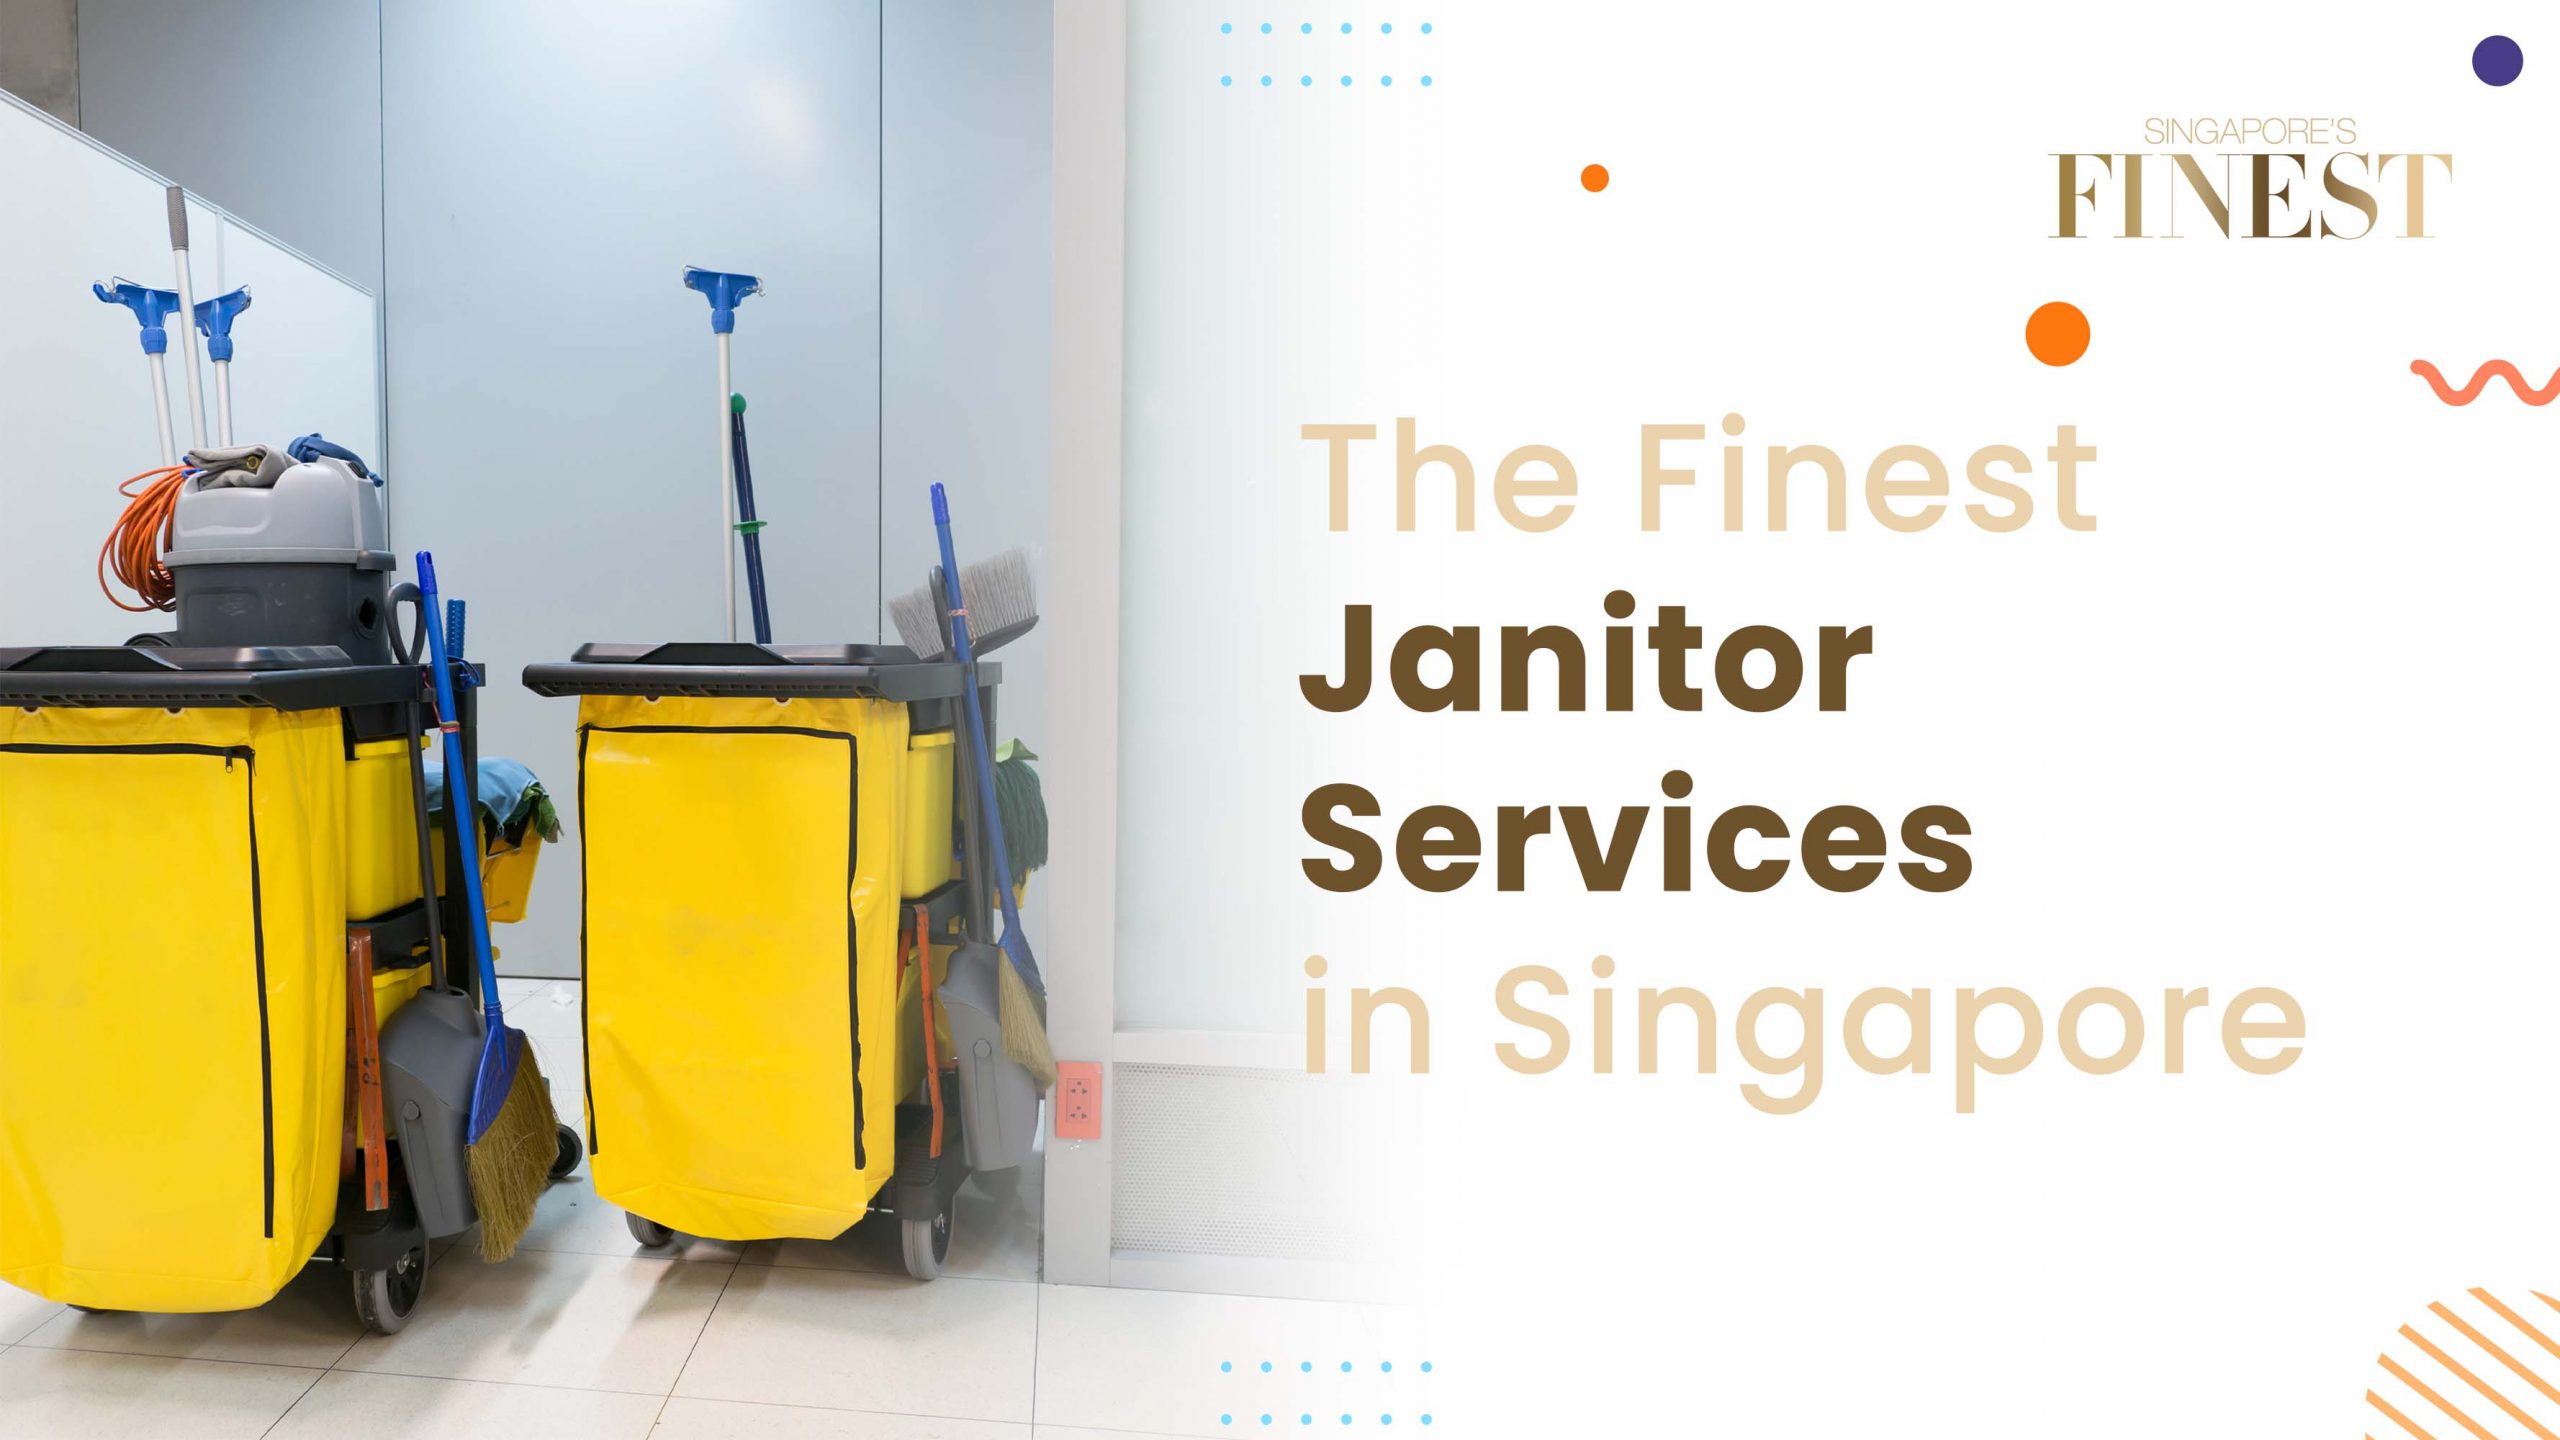 Finest Janitor Services in Singapore